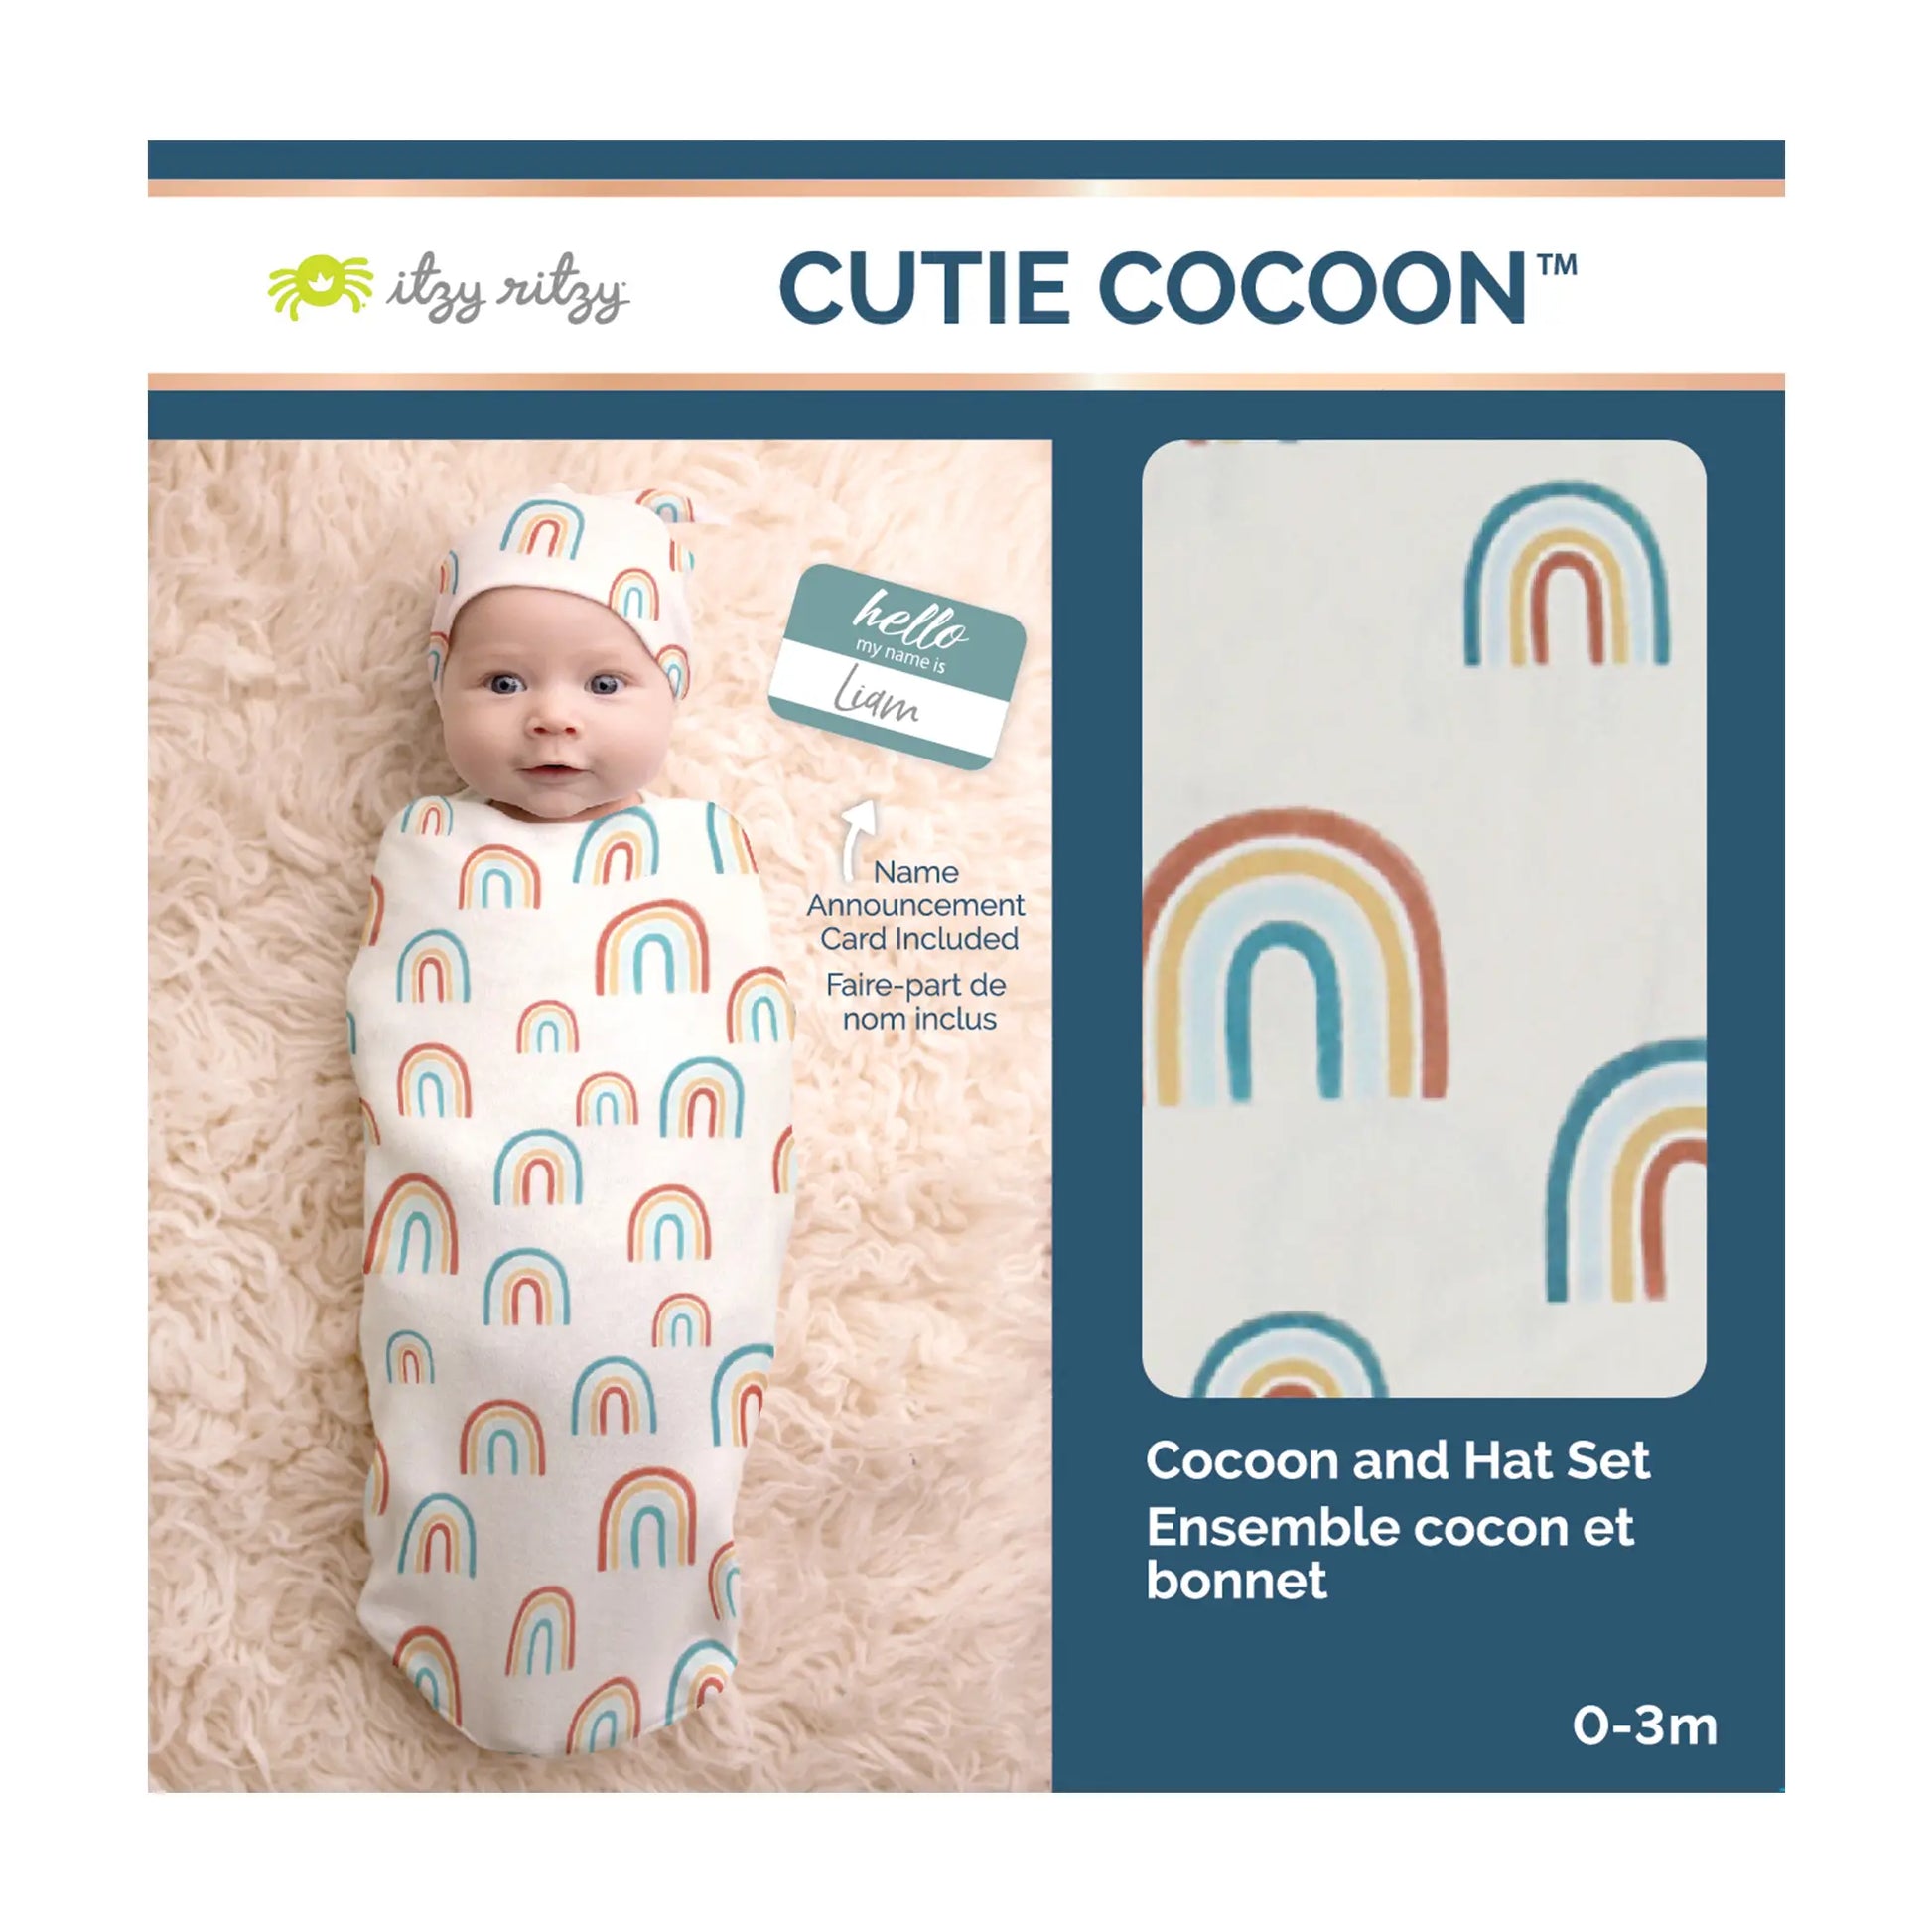 Itzy Ritzy - Cutie Cocoon™ Matching Cocoon & Hat Sets (7426905047218)